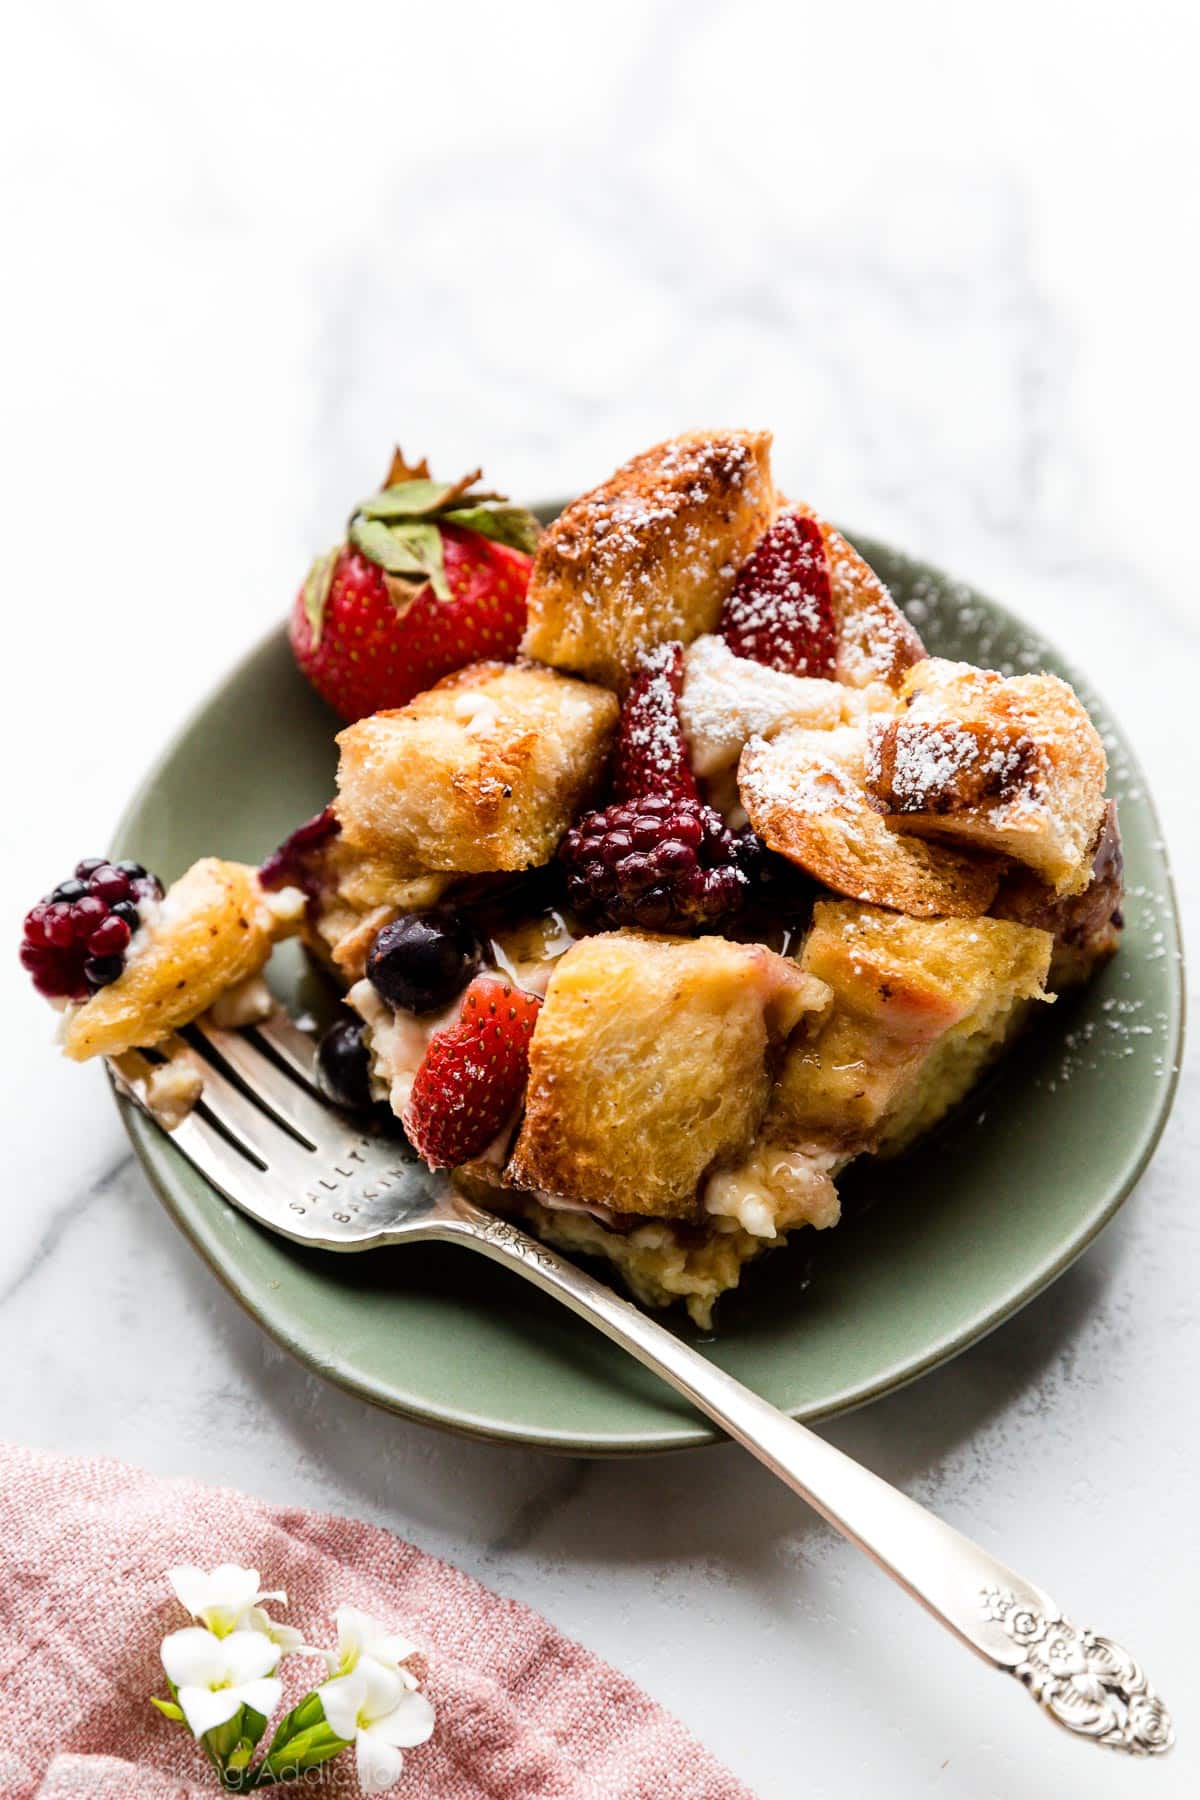 Mixed berries with cream cheese. Bake French toast on a green plate